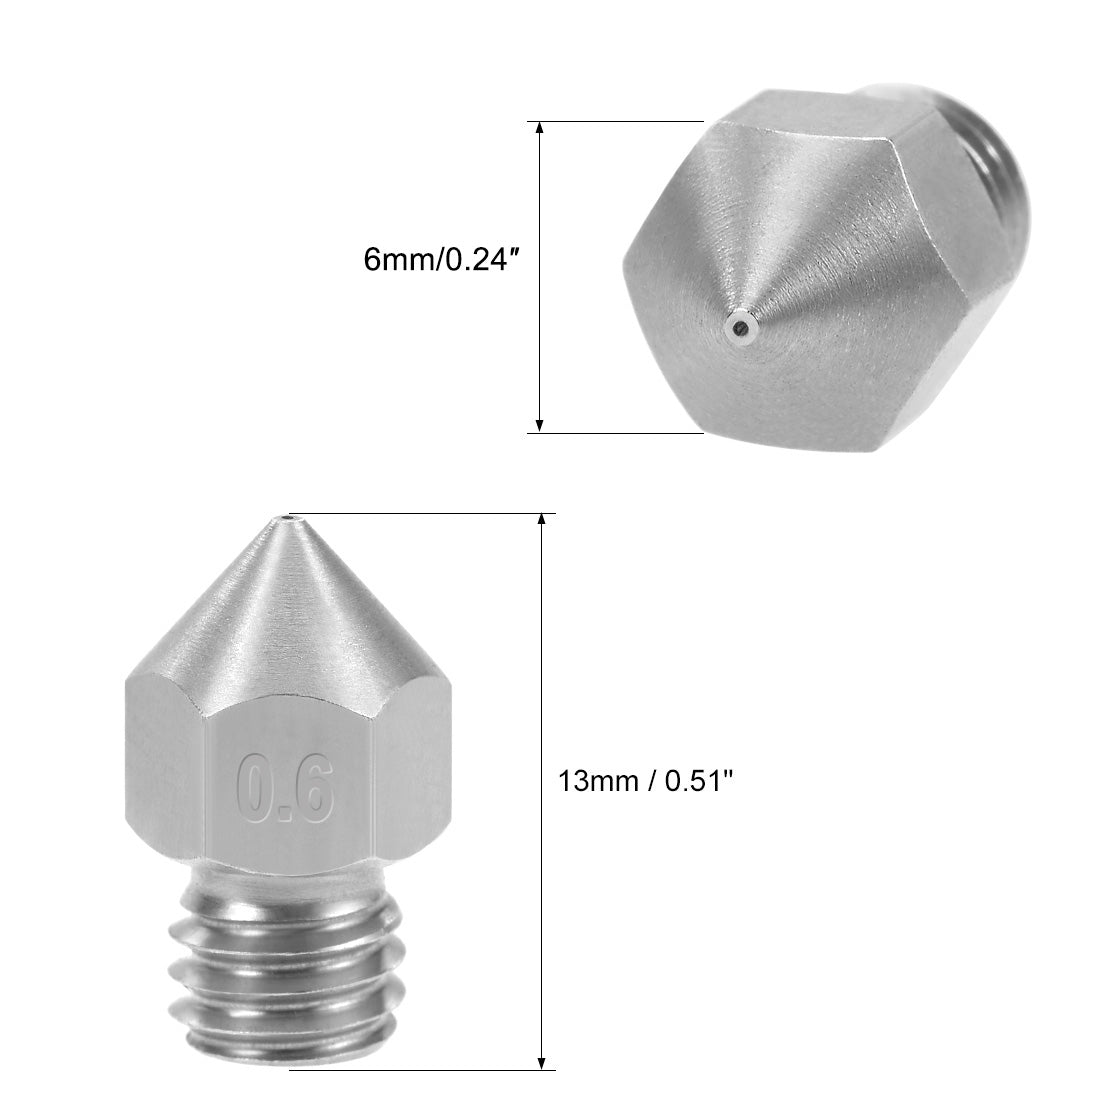 uxcell Uxcell 0.6mm 3D Printer Nozzles Head M6 for MK8 1.75mm, Stainless Steel 4pcs